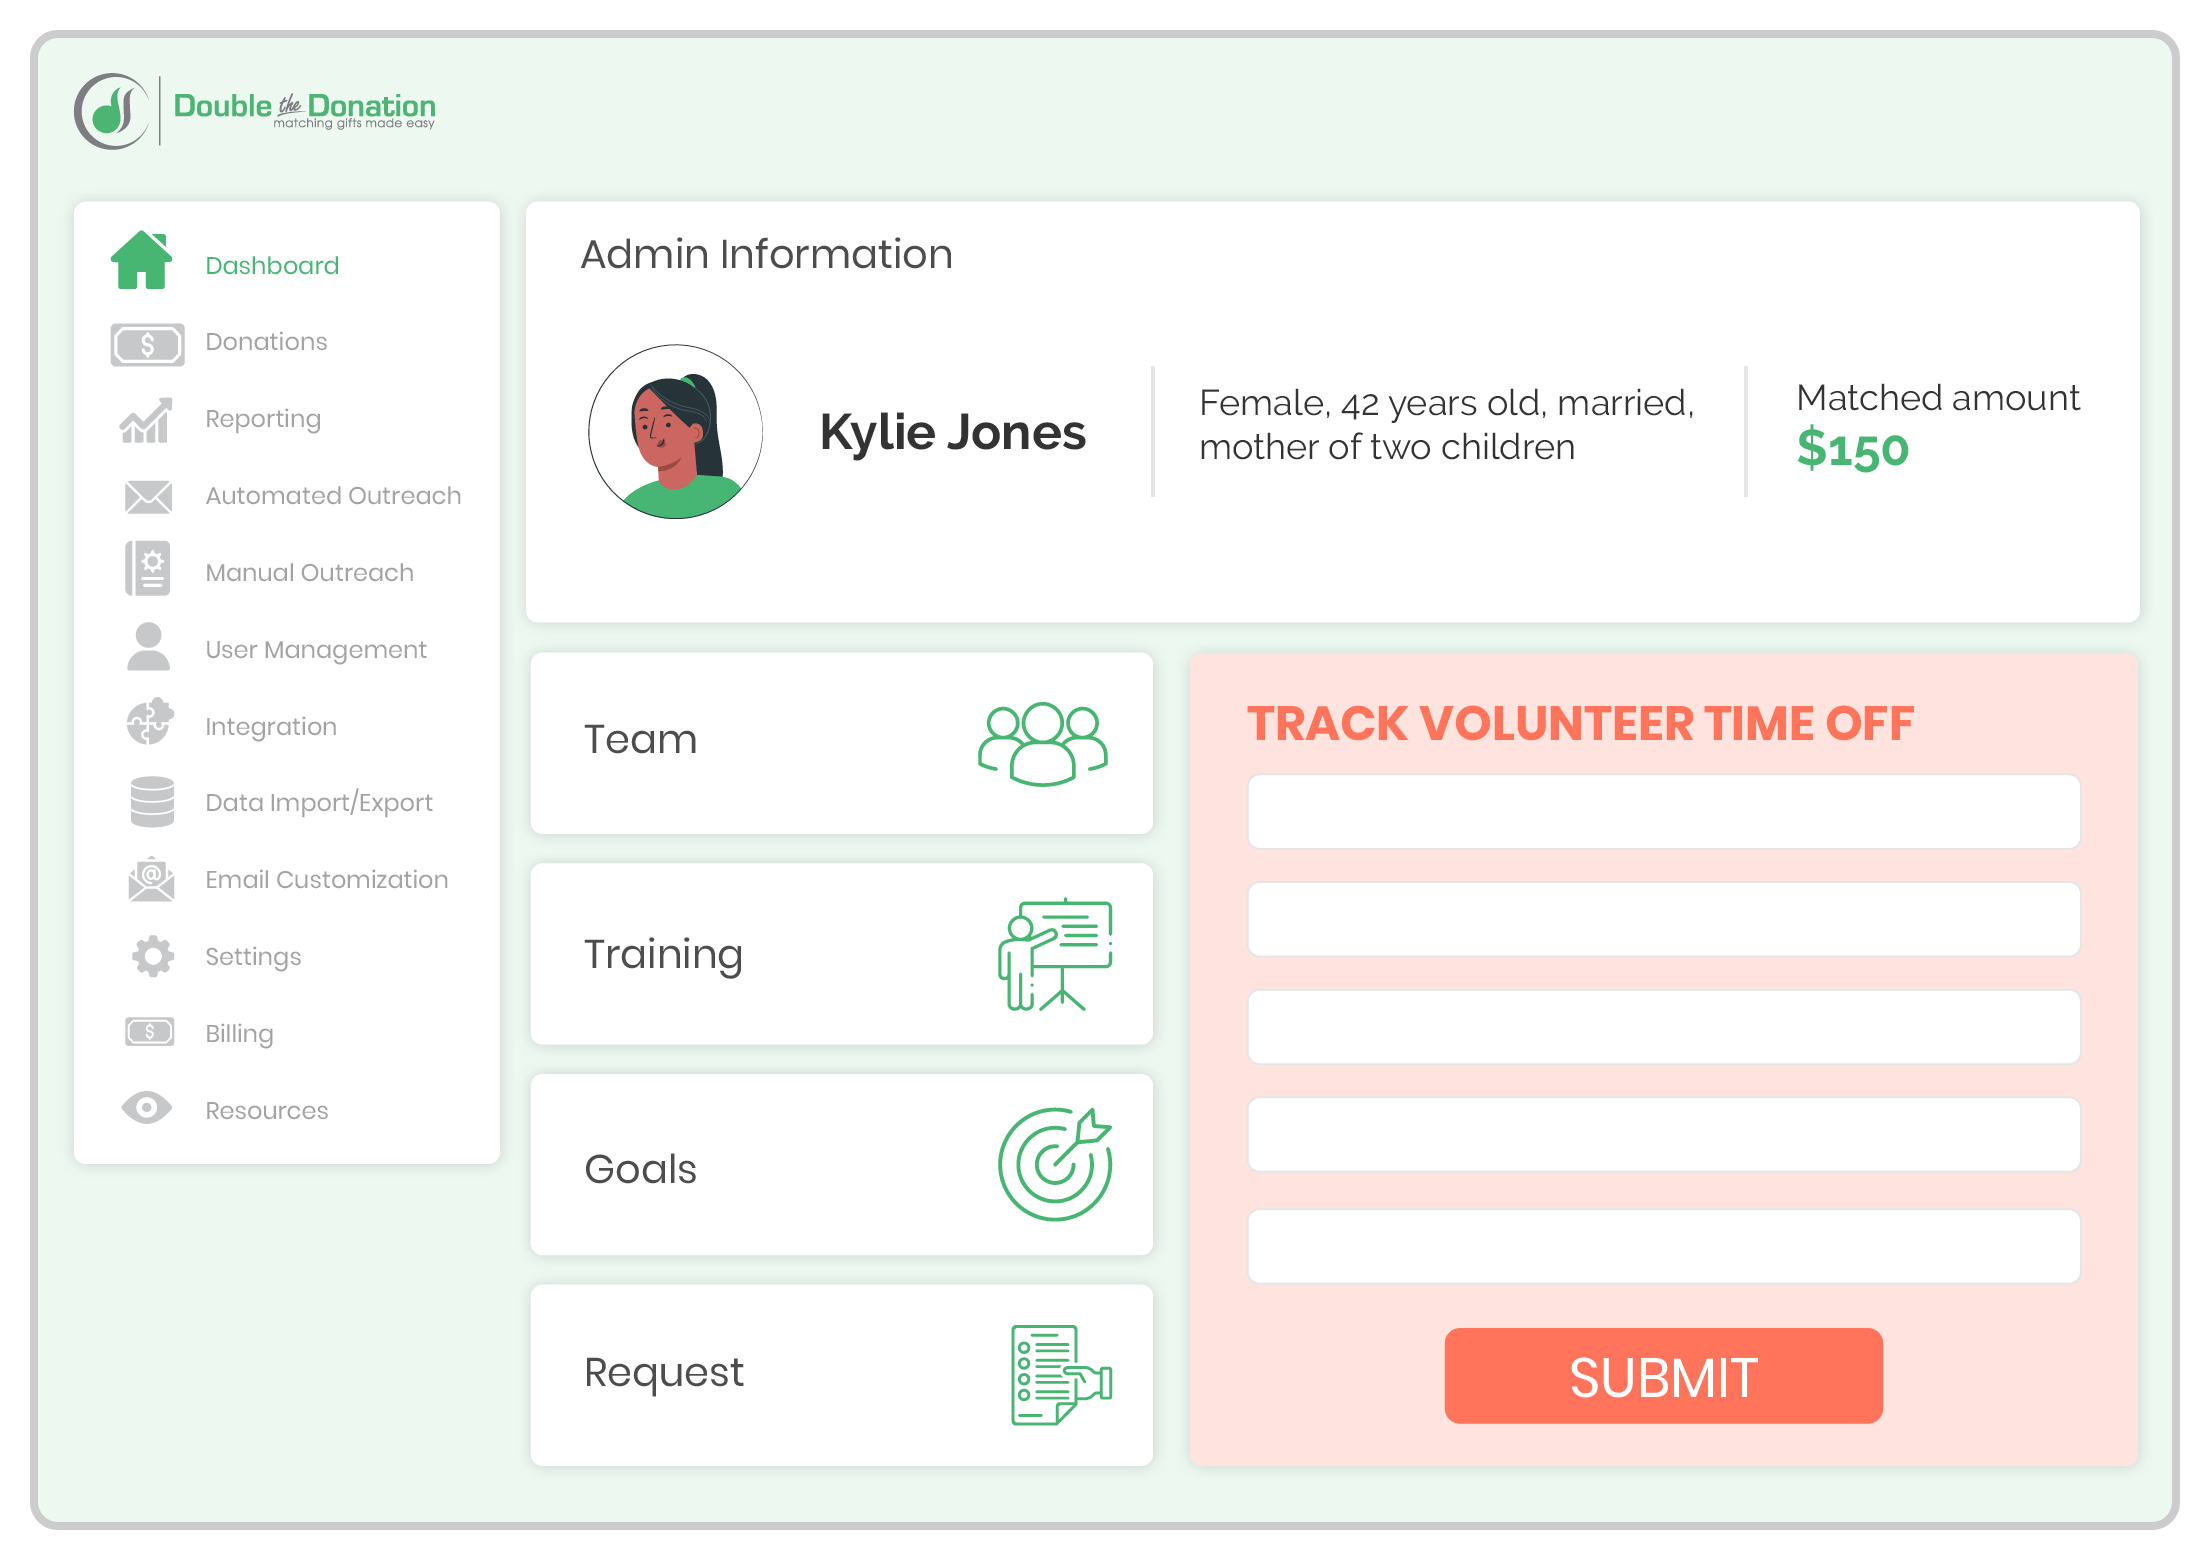 Tracking Volunteer Time Off with a HRIS